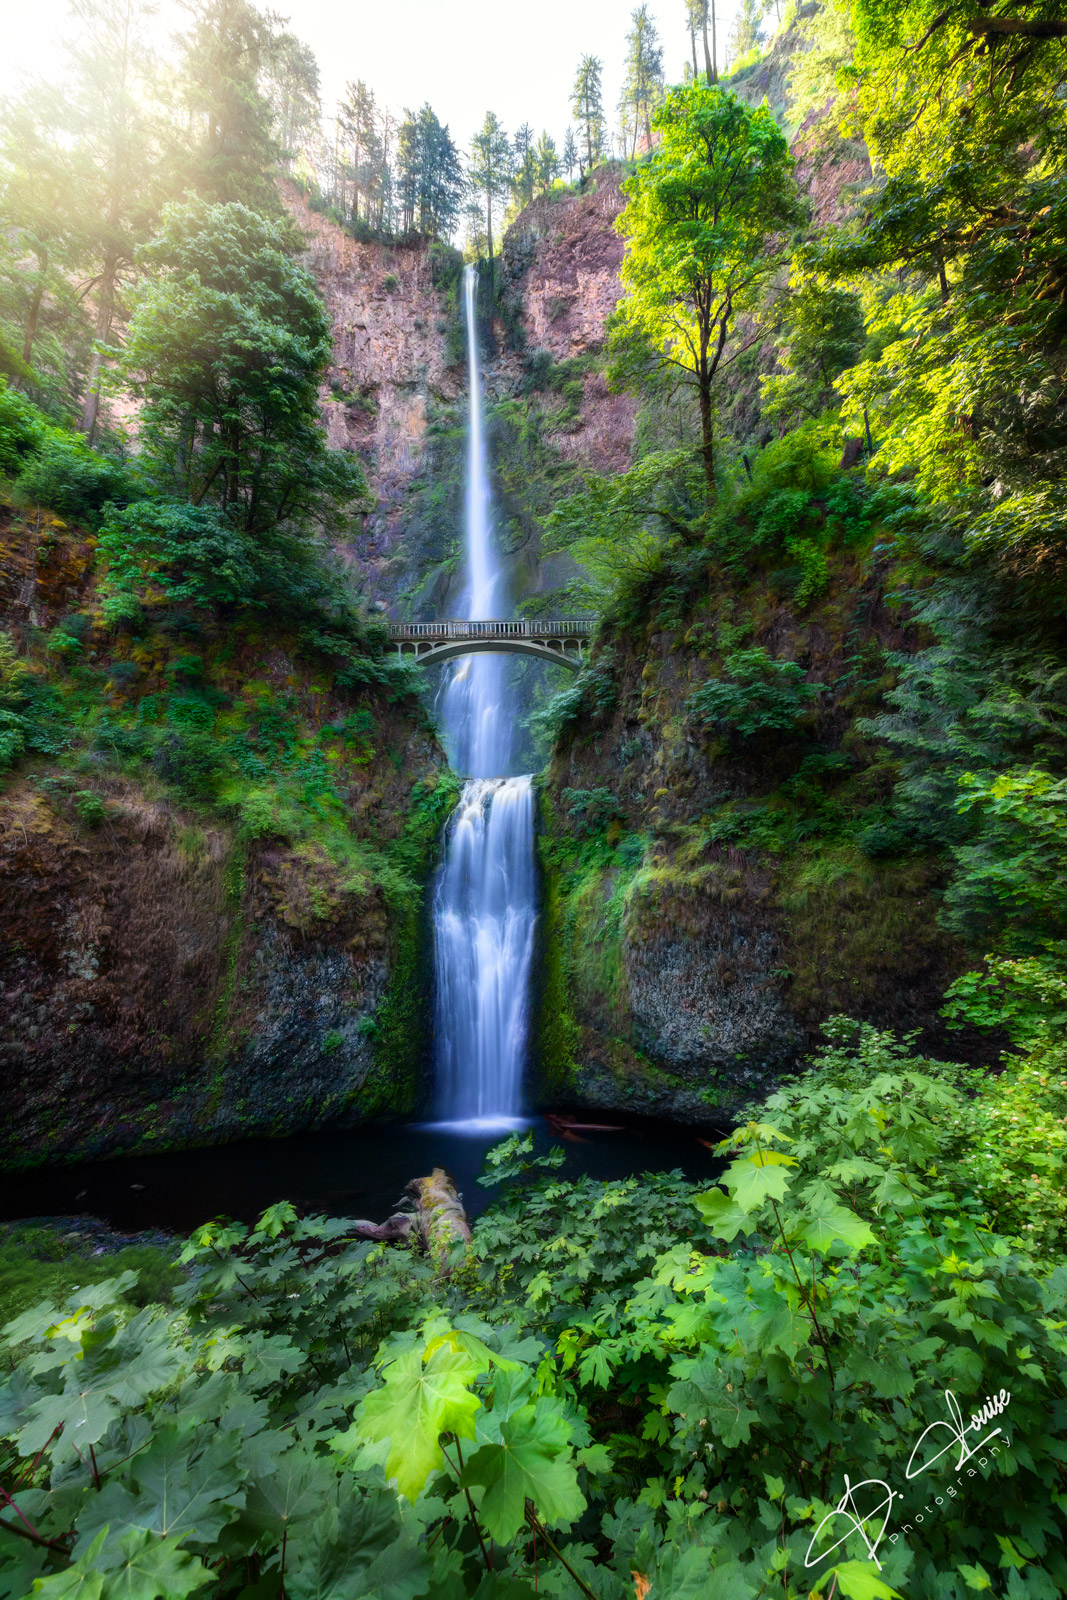 Multnomah Falls- The Crown Jewel of the Pacific Northwest waterfalls. Though one of the most popular, it is without a doubt spectacular...